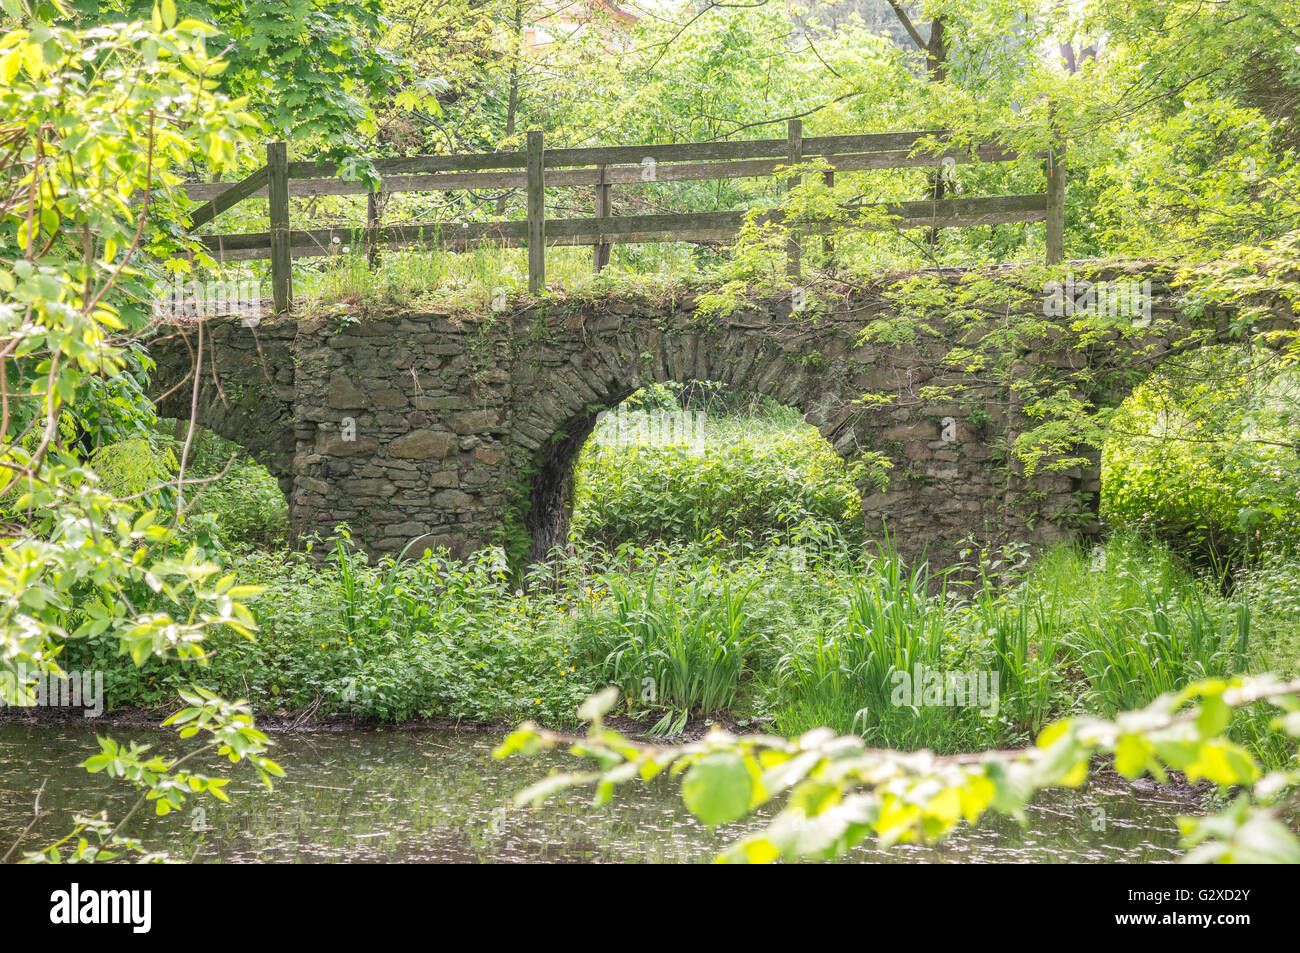 Ruined old stony bridge over the moat in the spring greenery Stock Photo